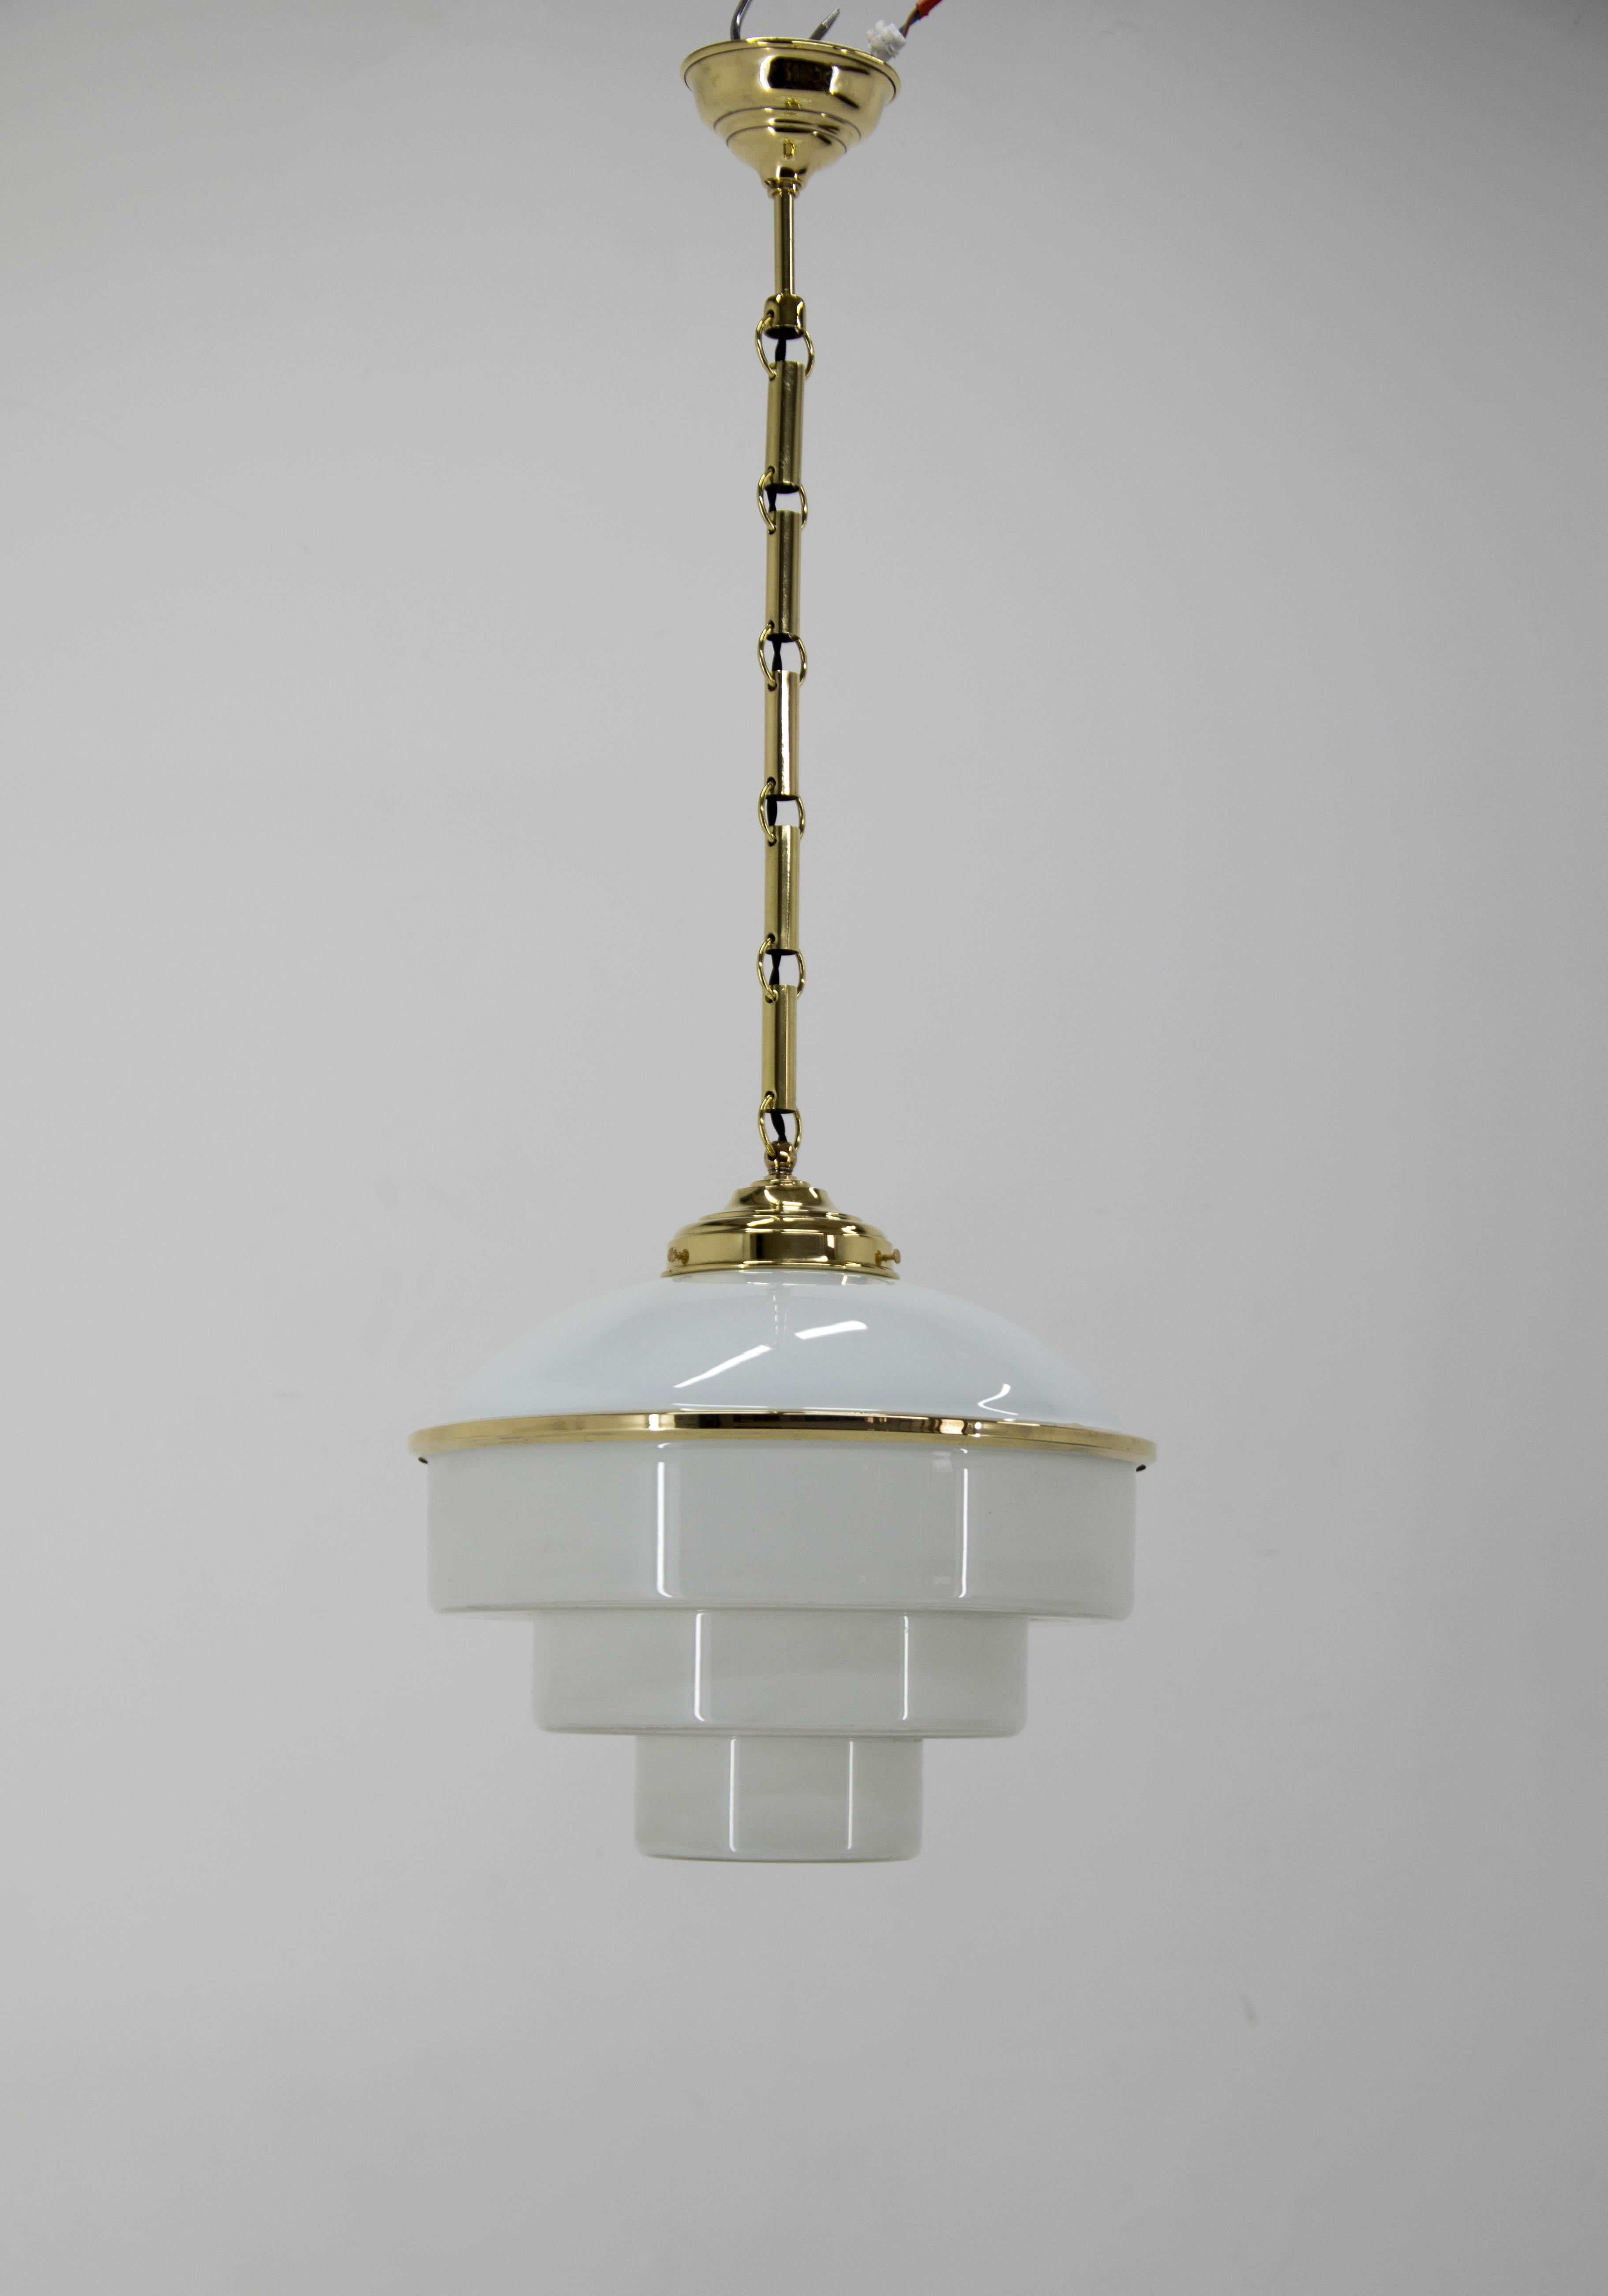 Beautiful Art Deco pendant made of brass and glass.
Upper opaline glass is connected with semitransparent bottom glass with brass ring.
Restored: polished, rewired.
1x100W, E25-E27 bulb.
US wiring compatible.